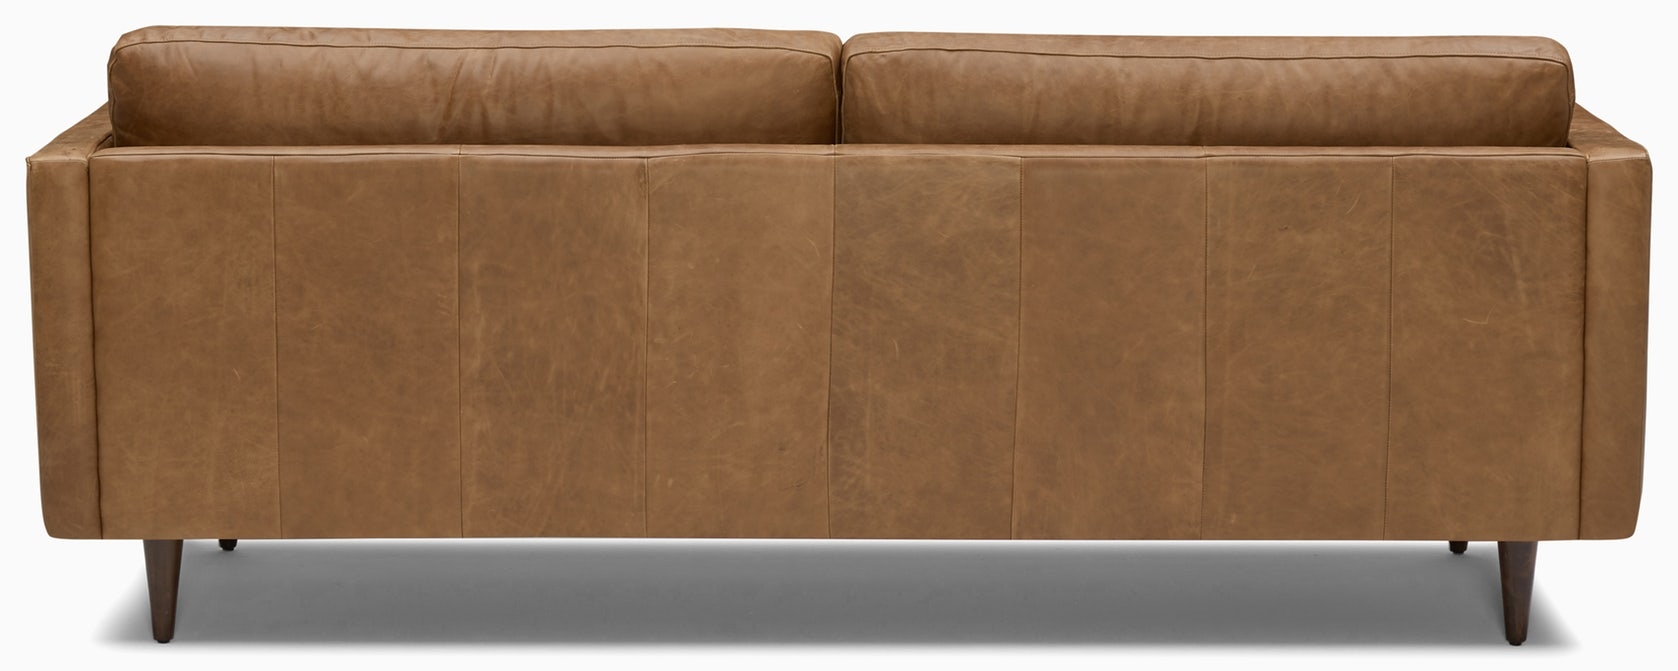 Briar Leather Sofa in Santiago Ale with Mocha wood stain - Image 4